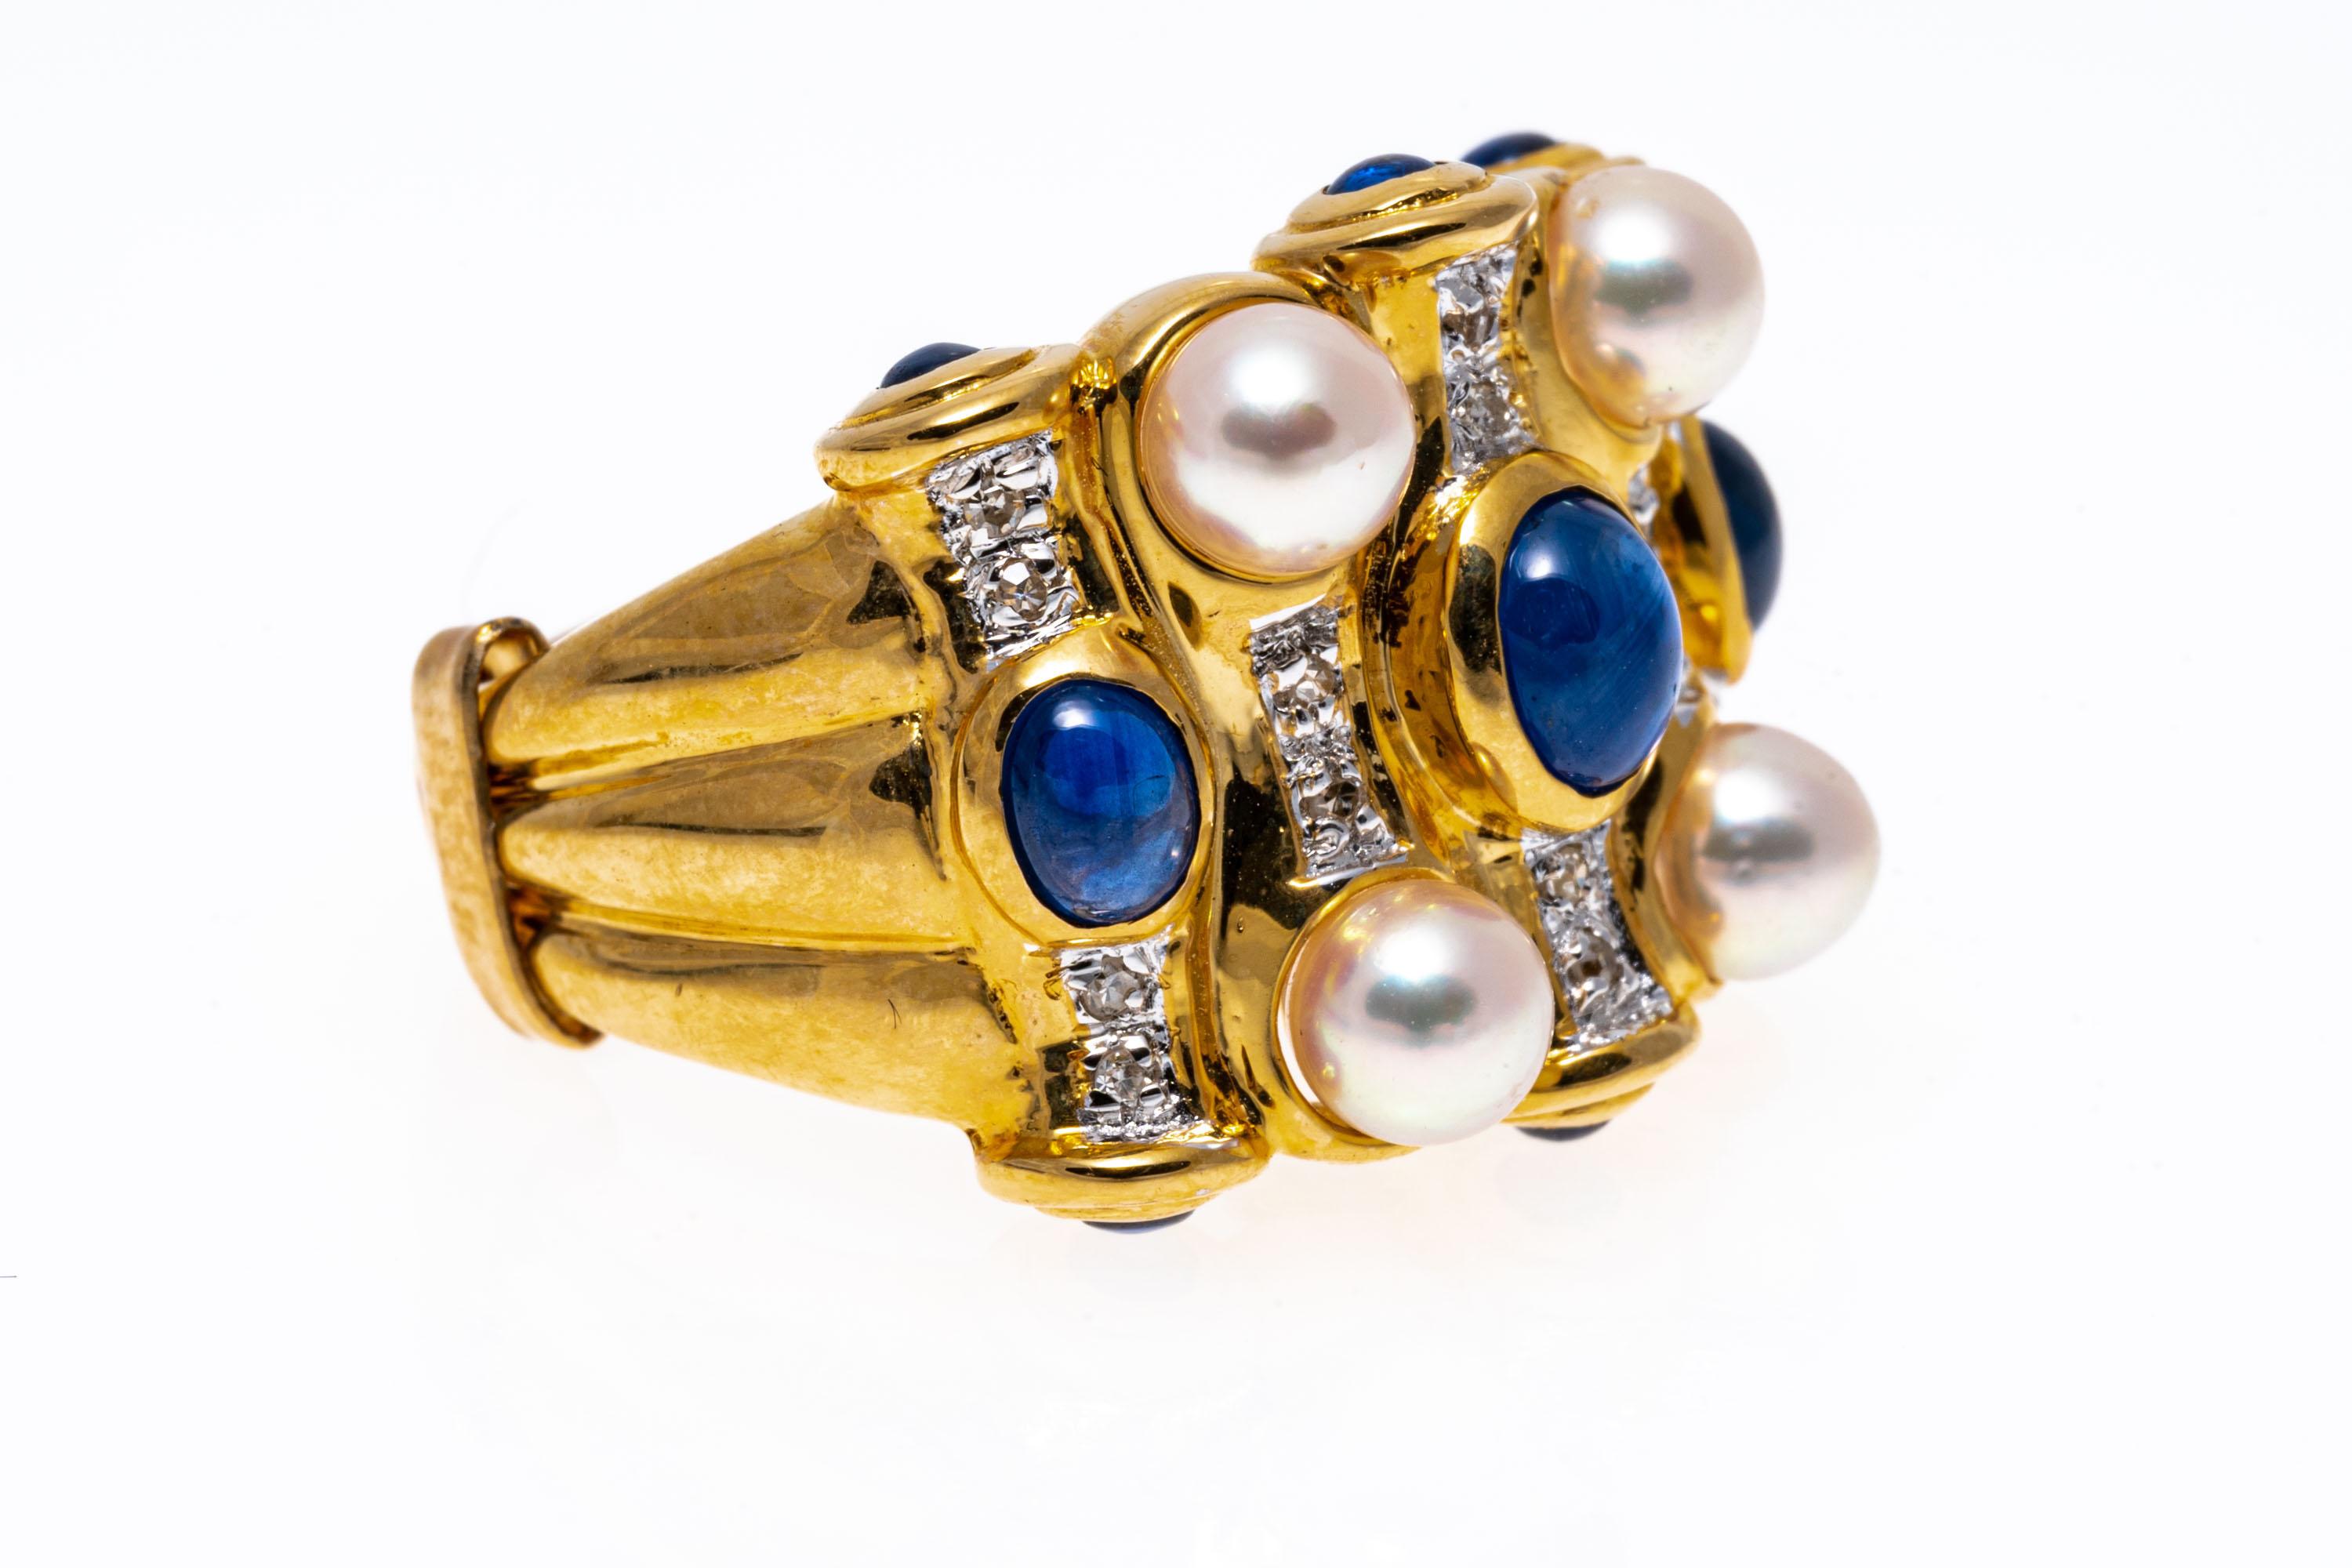 14k yellow gold ring. This stunning dome ring contains four, 4.25 mm pink toned, high lustre cultured pearls, set among a field of round faceted diamonds, approximately 0.08 TCW and punctuated with round and oval cabachon cut blue sapphires,